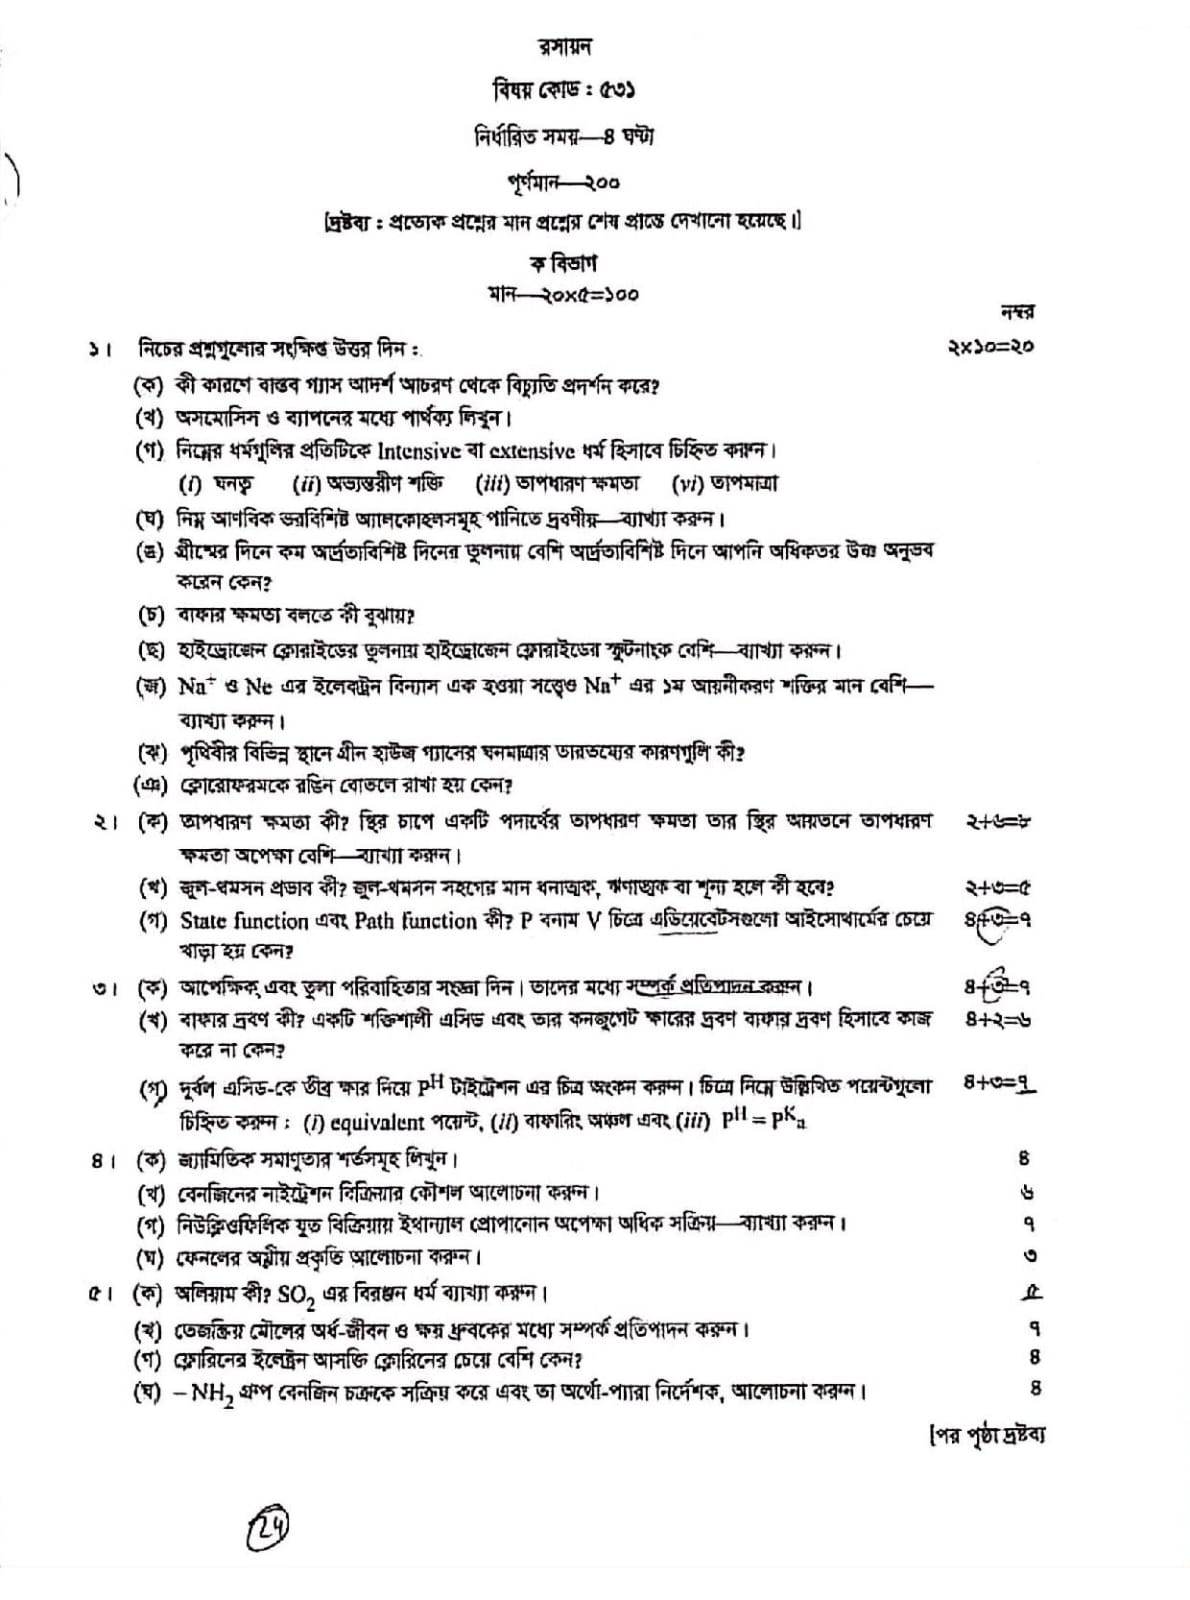 45th BCS Written Post Related Subject Question Chemistry - Subject Code 532 - Part - 1